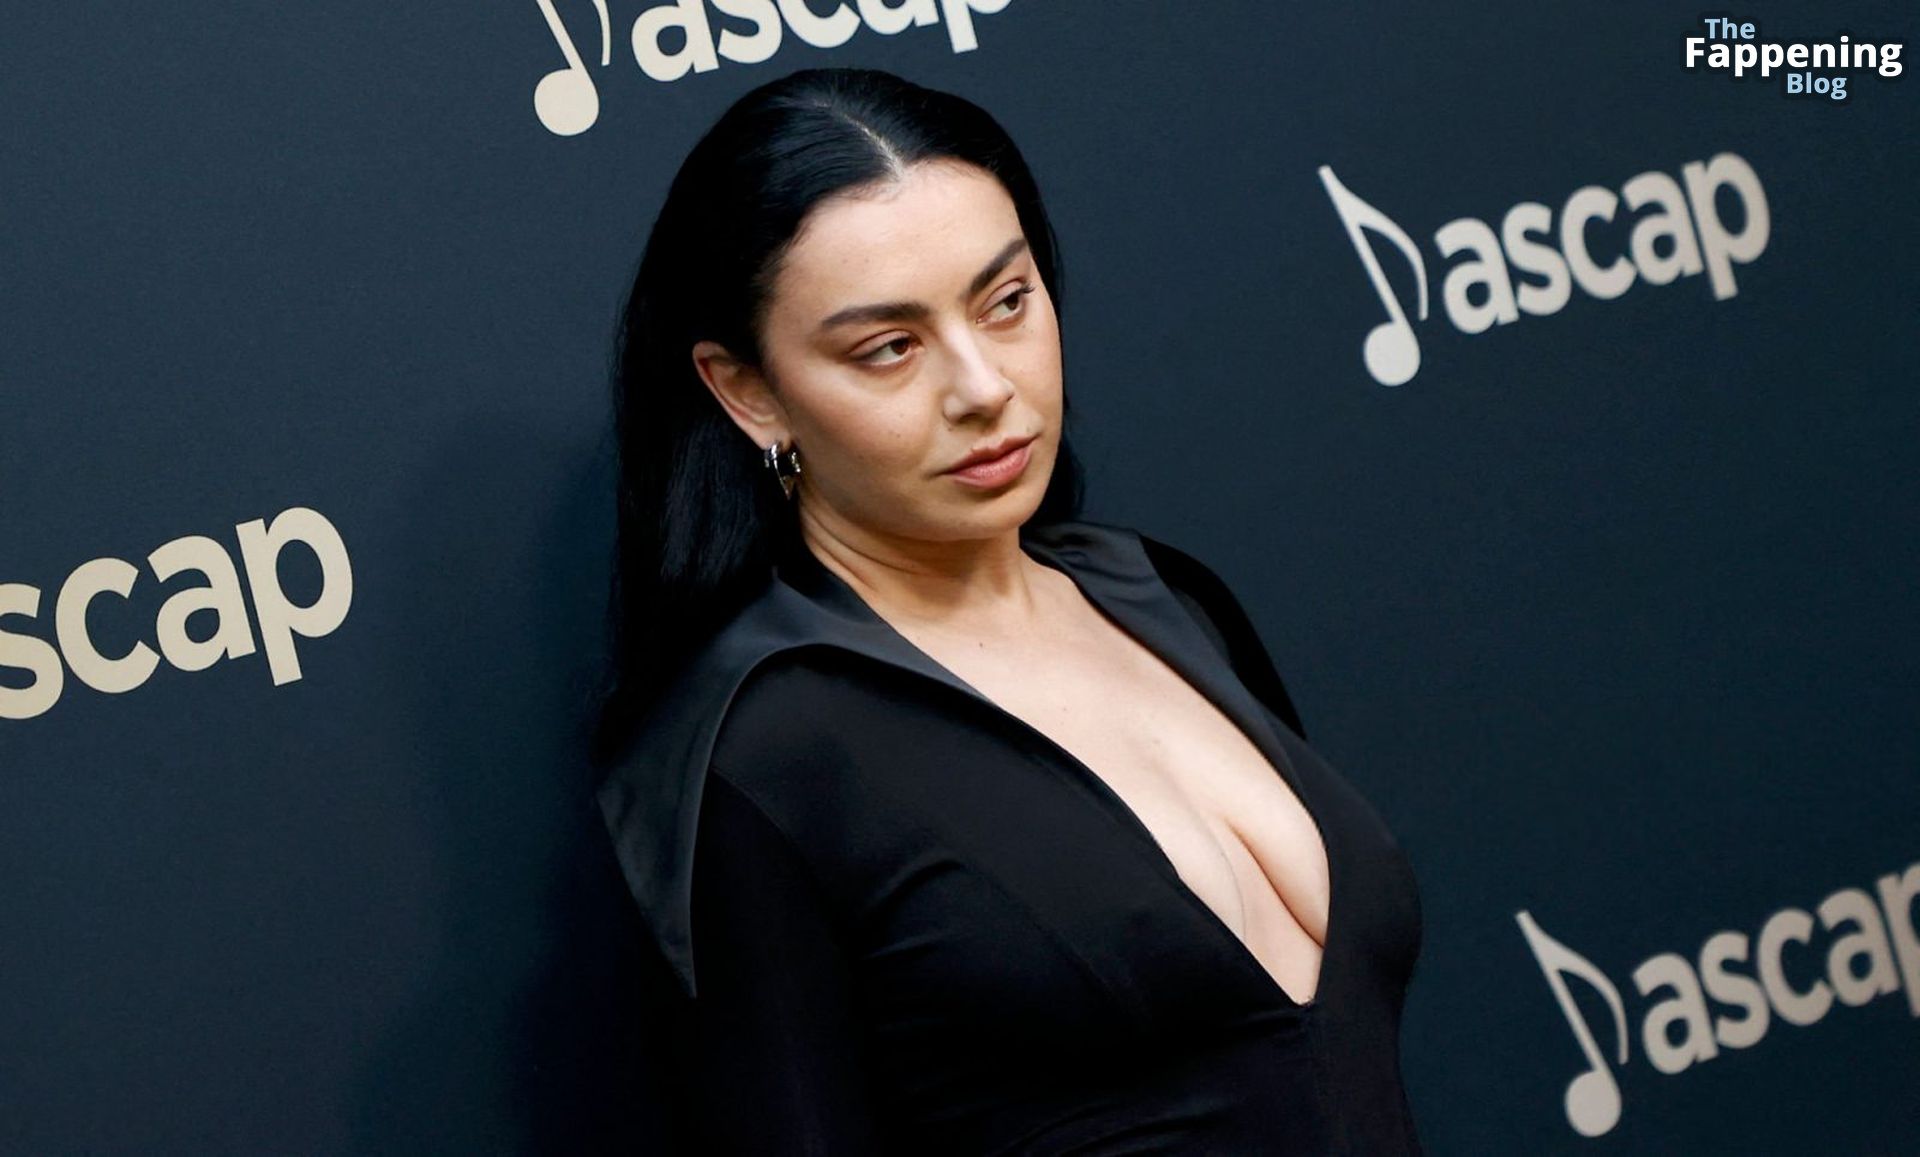 charli-xcx-braless-cleavage-ascap-pop-music-awards-7-thefappeningblog.com_.jpg